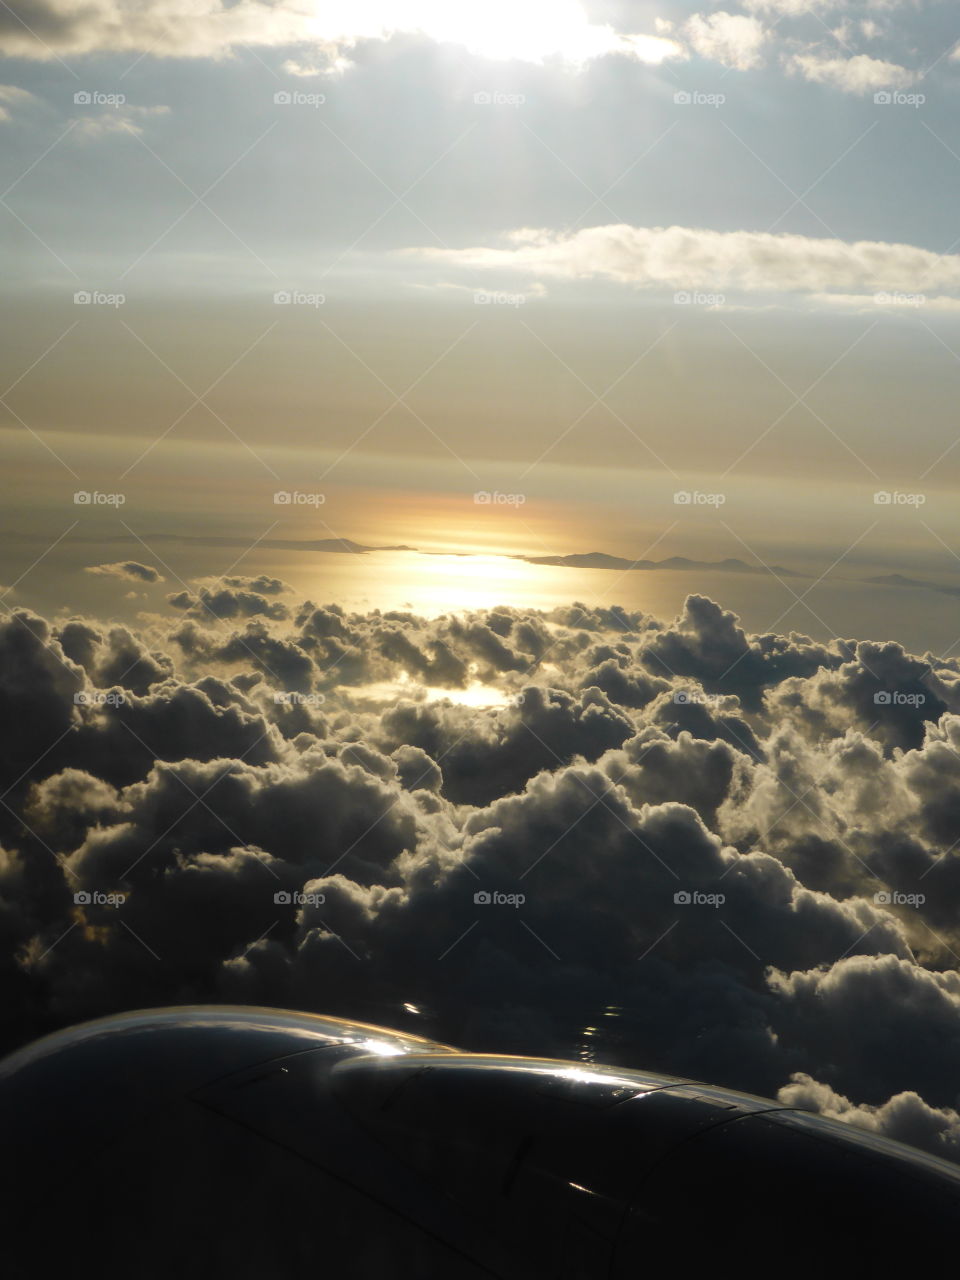 view from a plane, sunset seen over the clouds